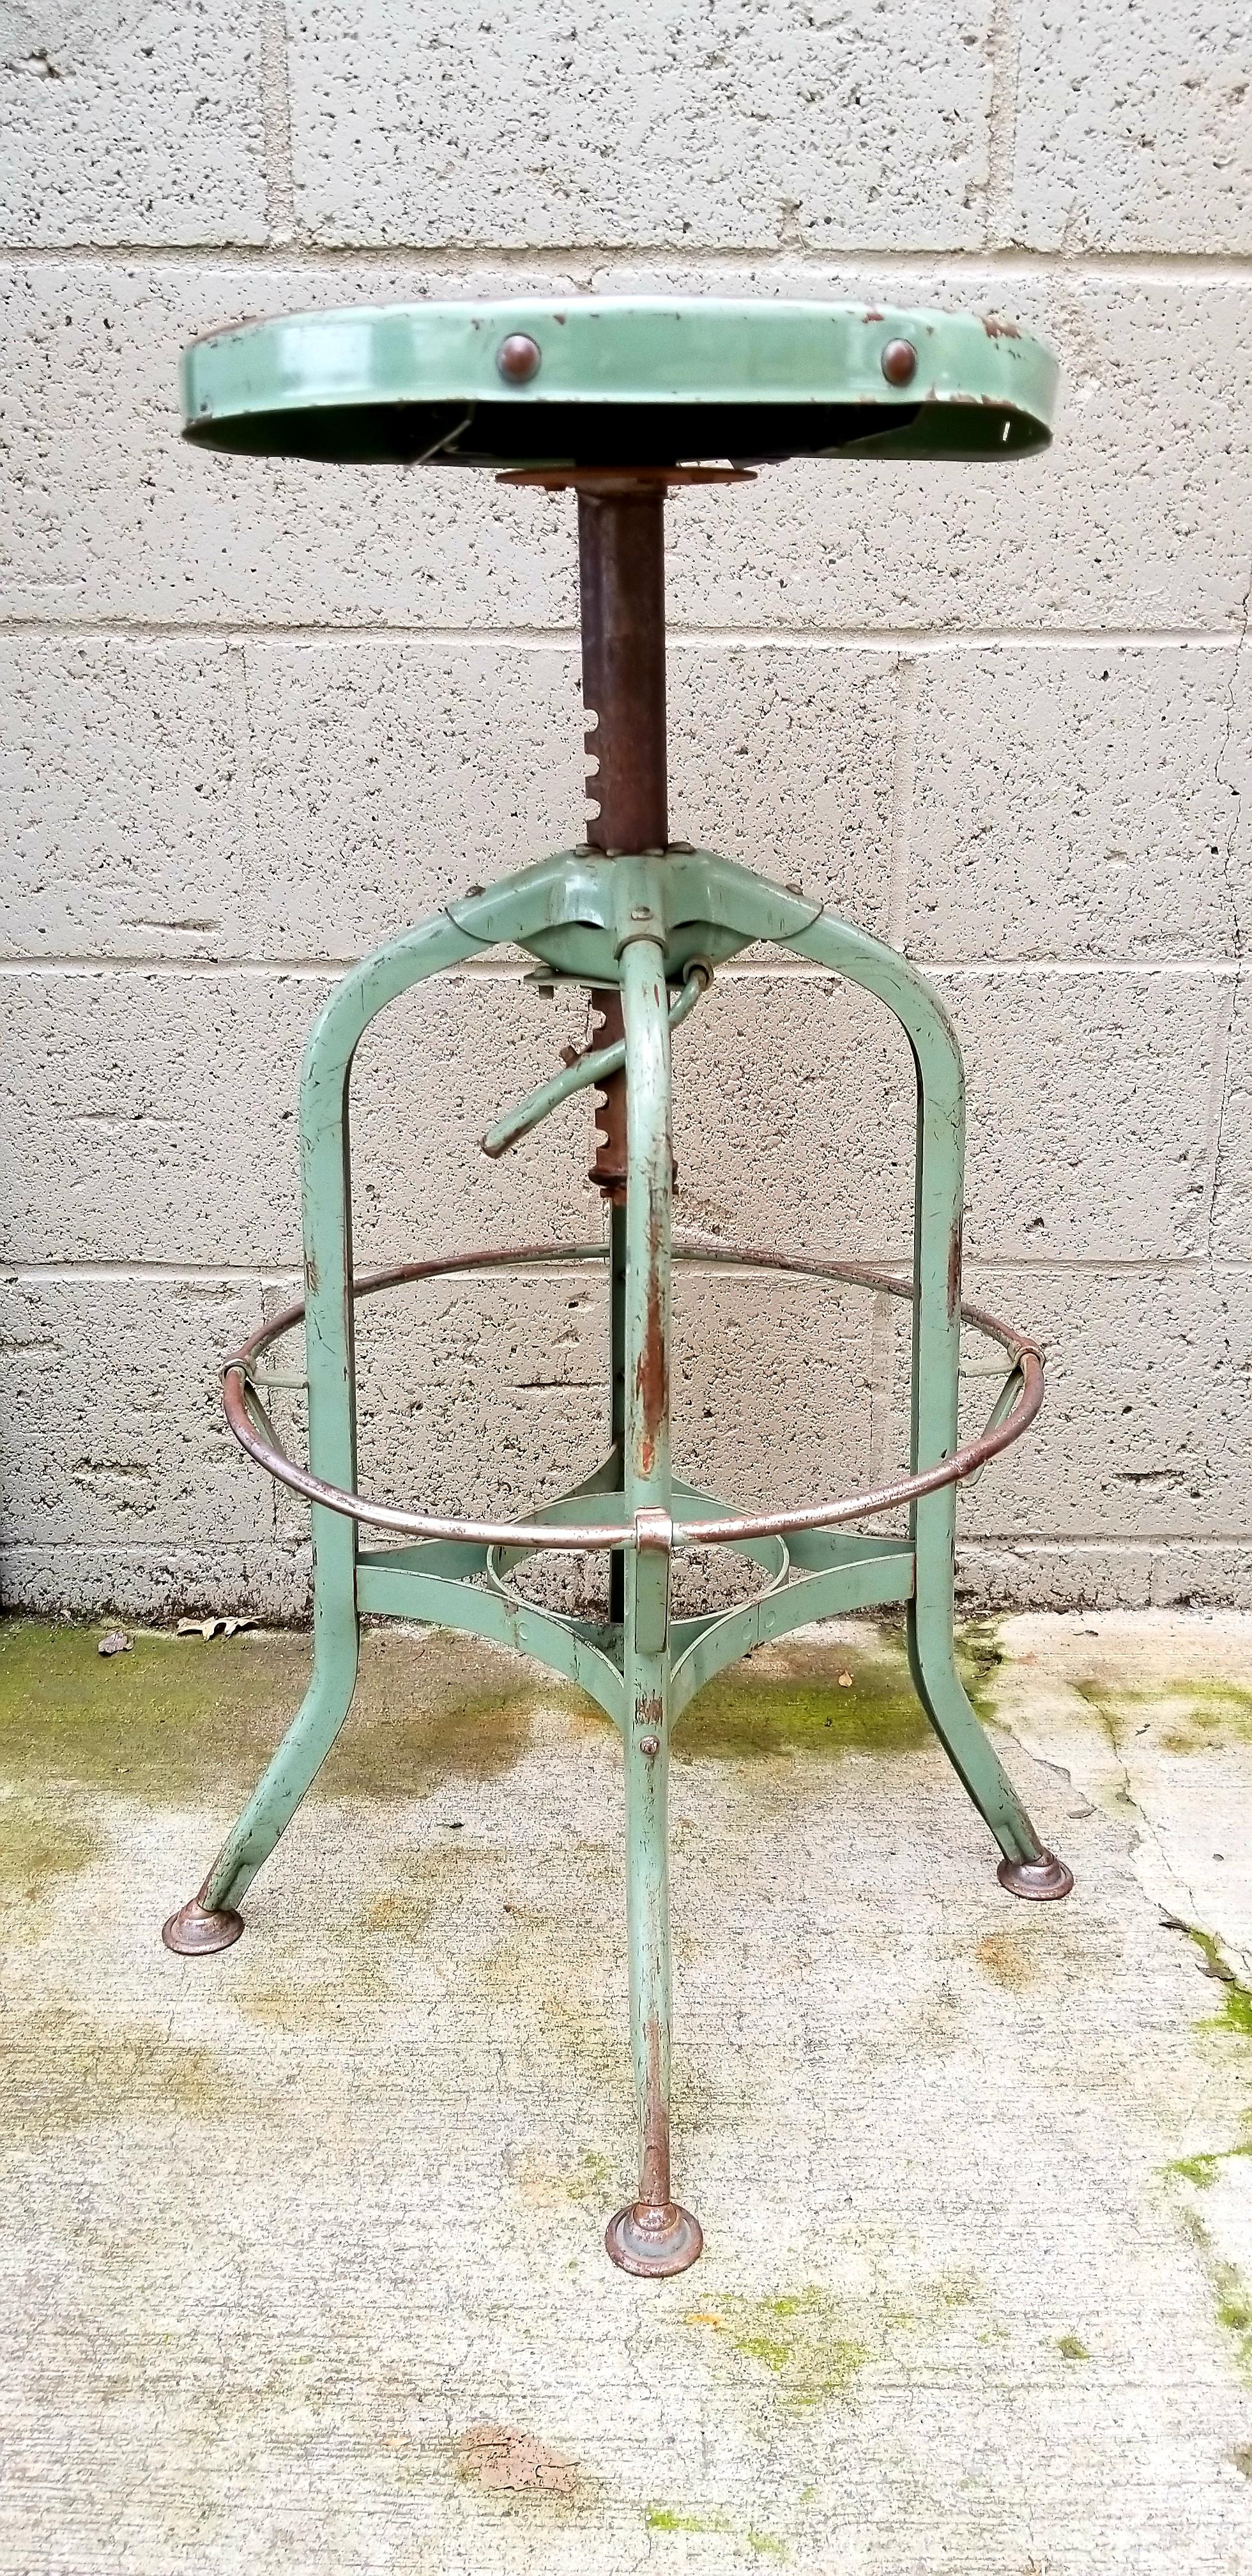 Original painted steel Toledo Industrial stool. A perfectly worn patina with dings and dents from years of use enhance this stool with charm and character. Measures: Seat diameter measures 14.25 inches, height is adjustable.